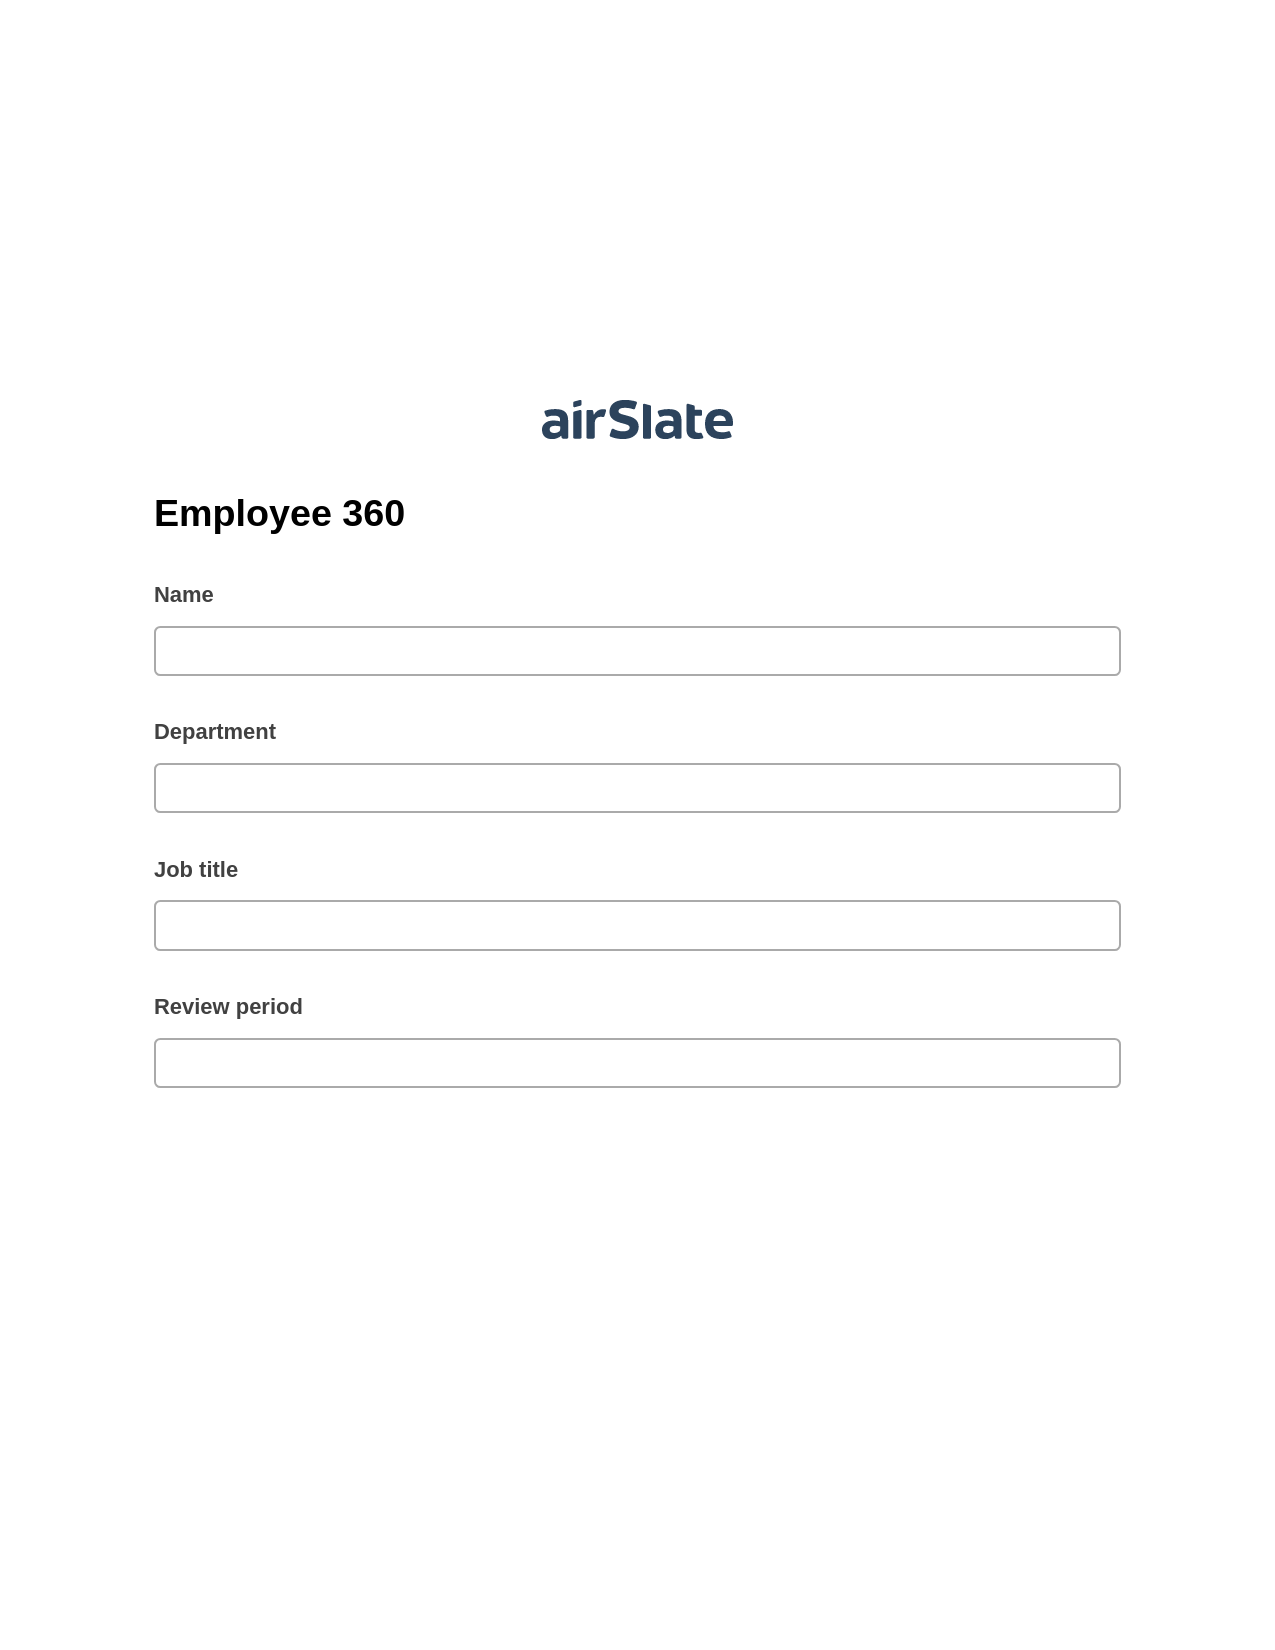 Multirole Employee 360 Pre-fill from another Slate Bot, Update MS Dynamics 365 Record Bot, Export to Google Sheet Bot